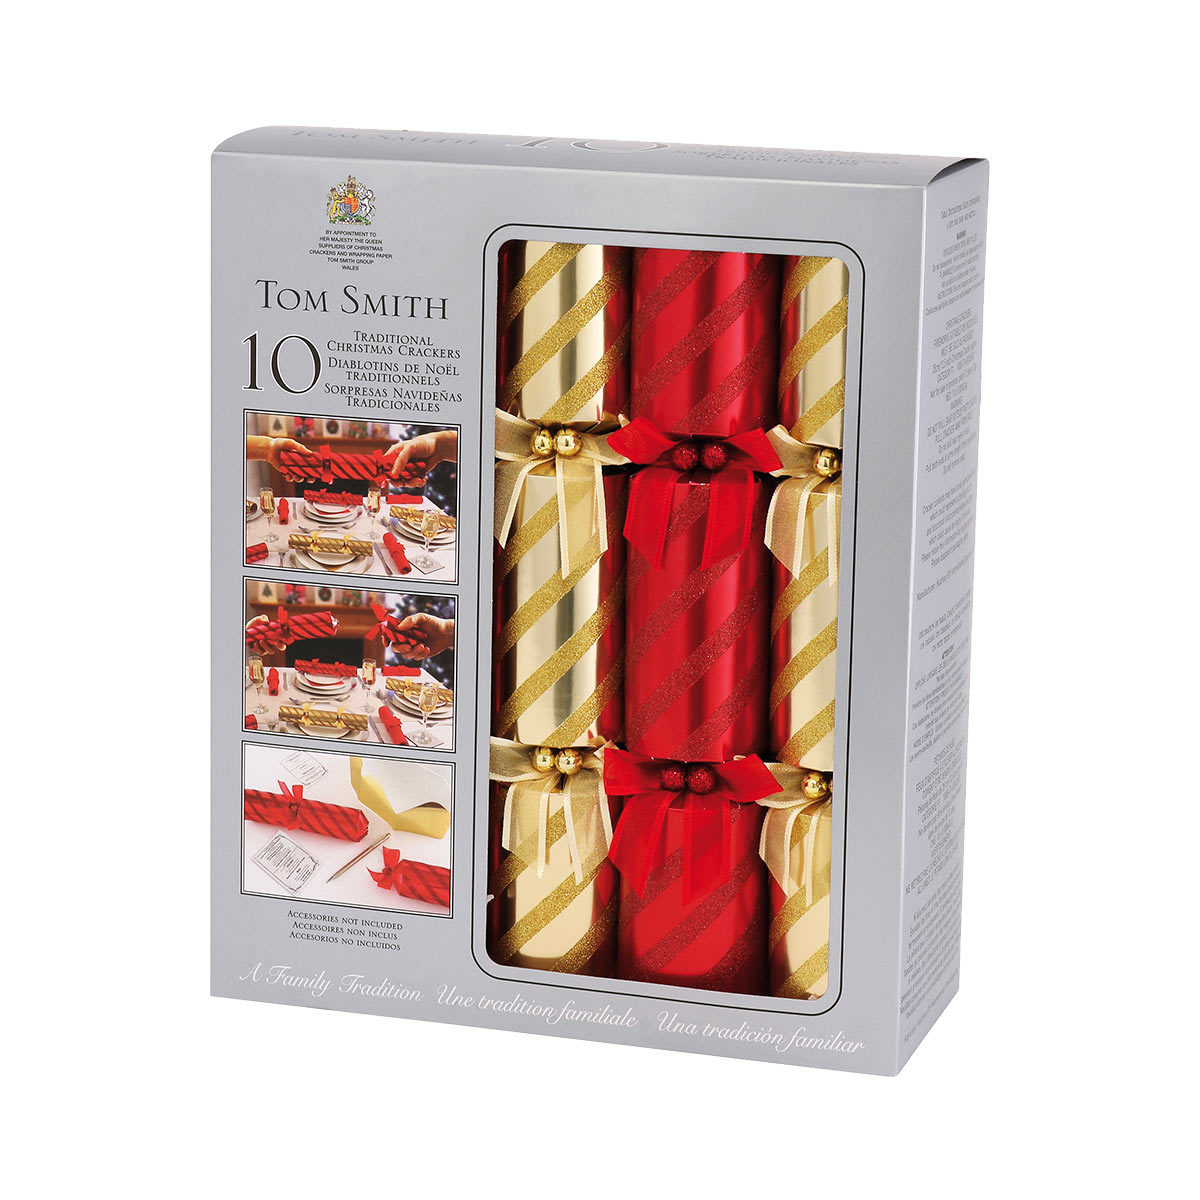 Tom Smith 12.5" (32cm) Traditional Christmas Cracker 10 Pack in Red and Gold